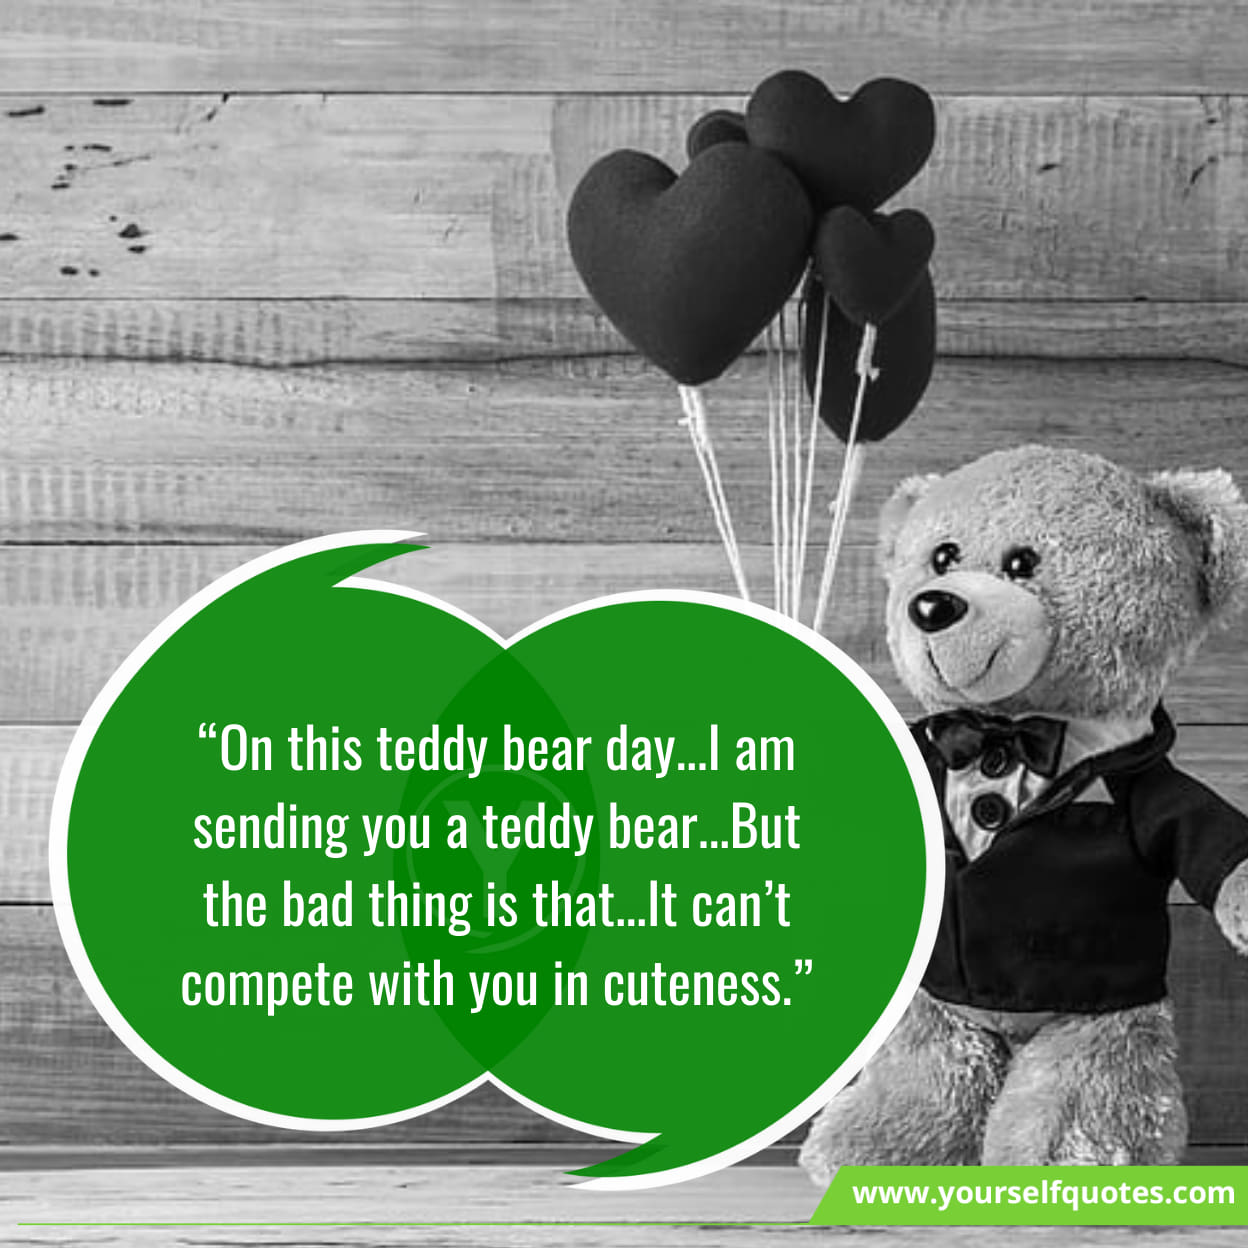 Best Wishes for Teddy Day